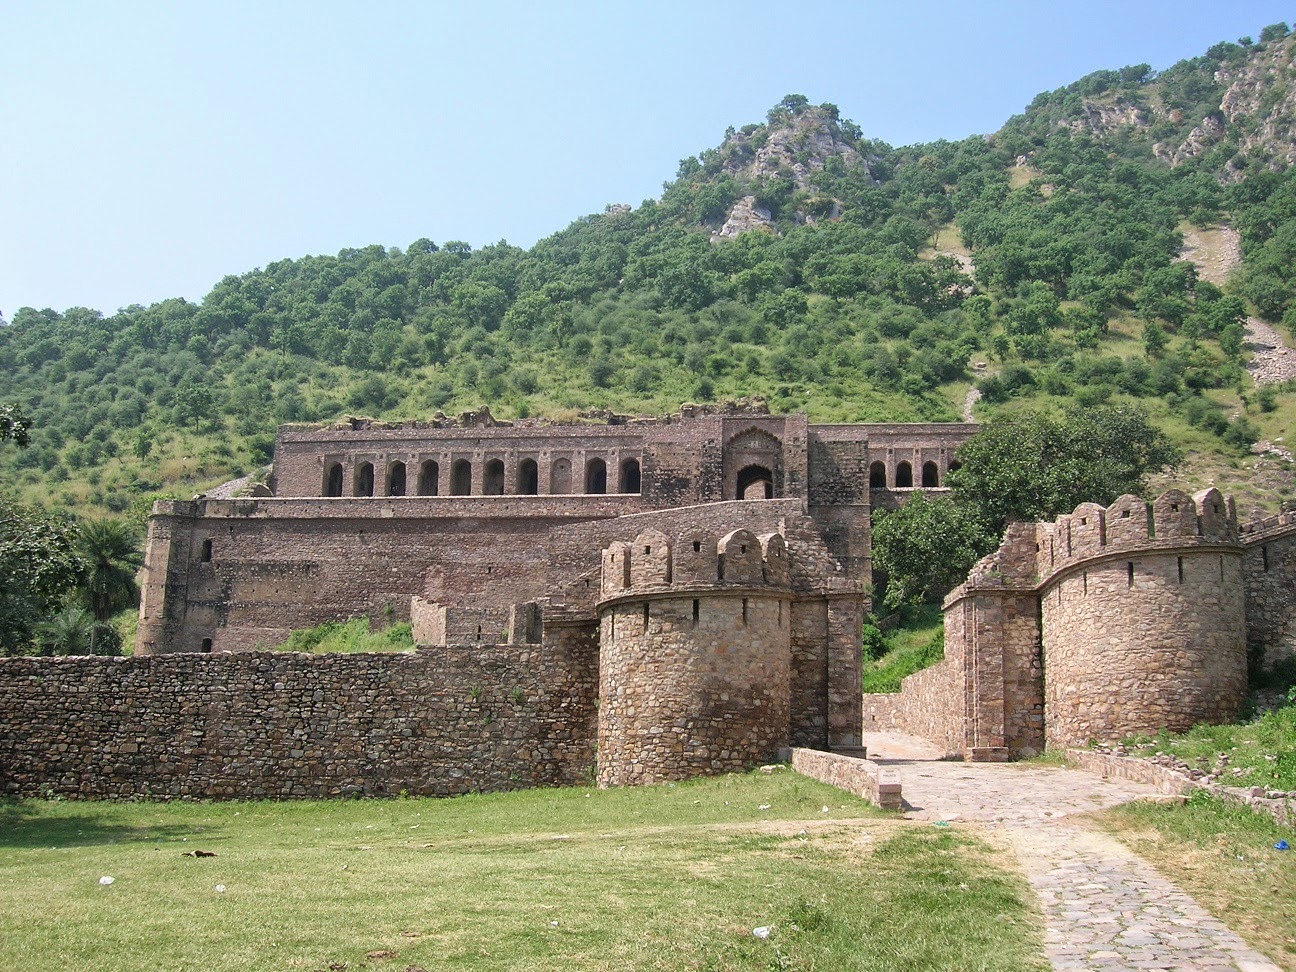 Bhangarh: India's most haunted Place